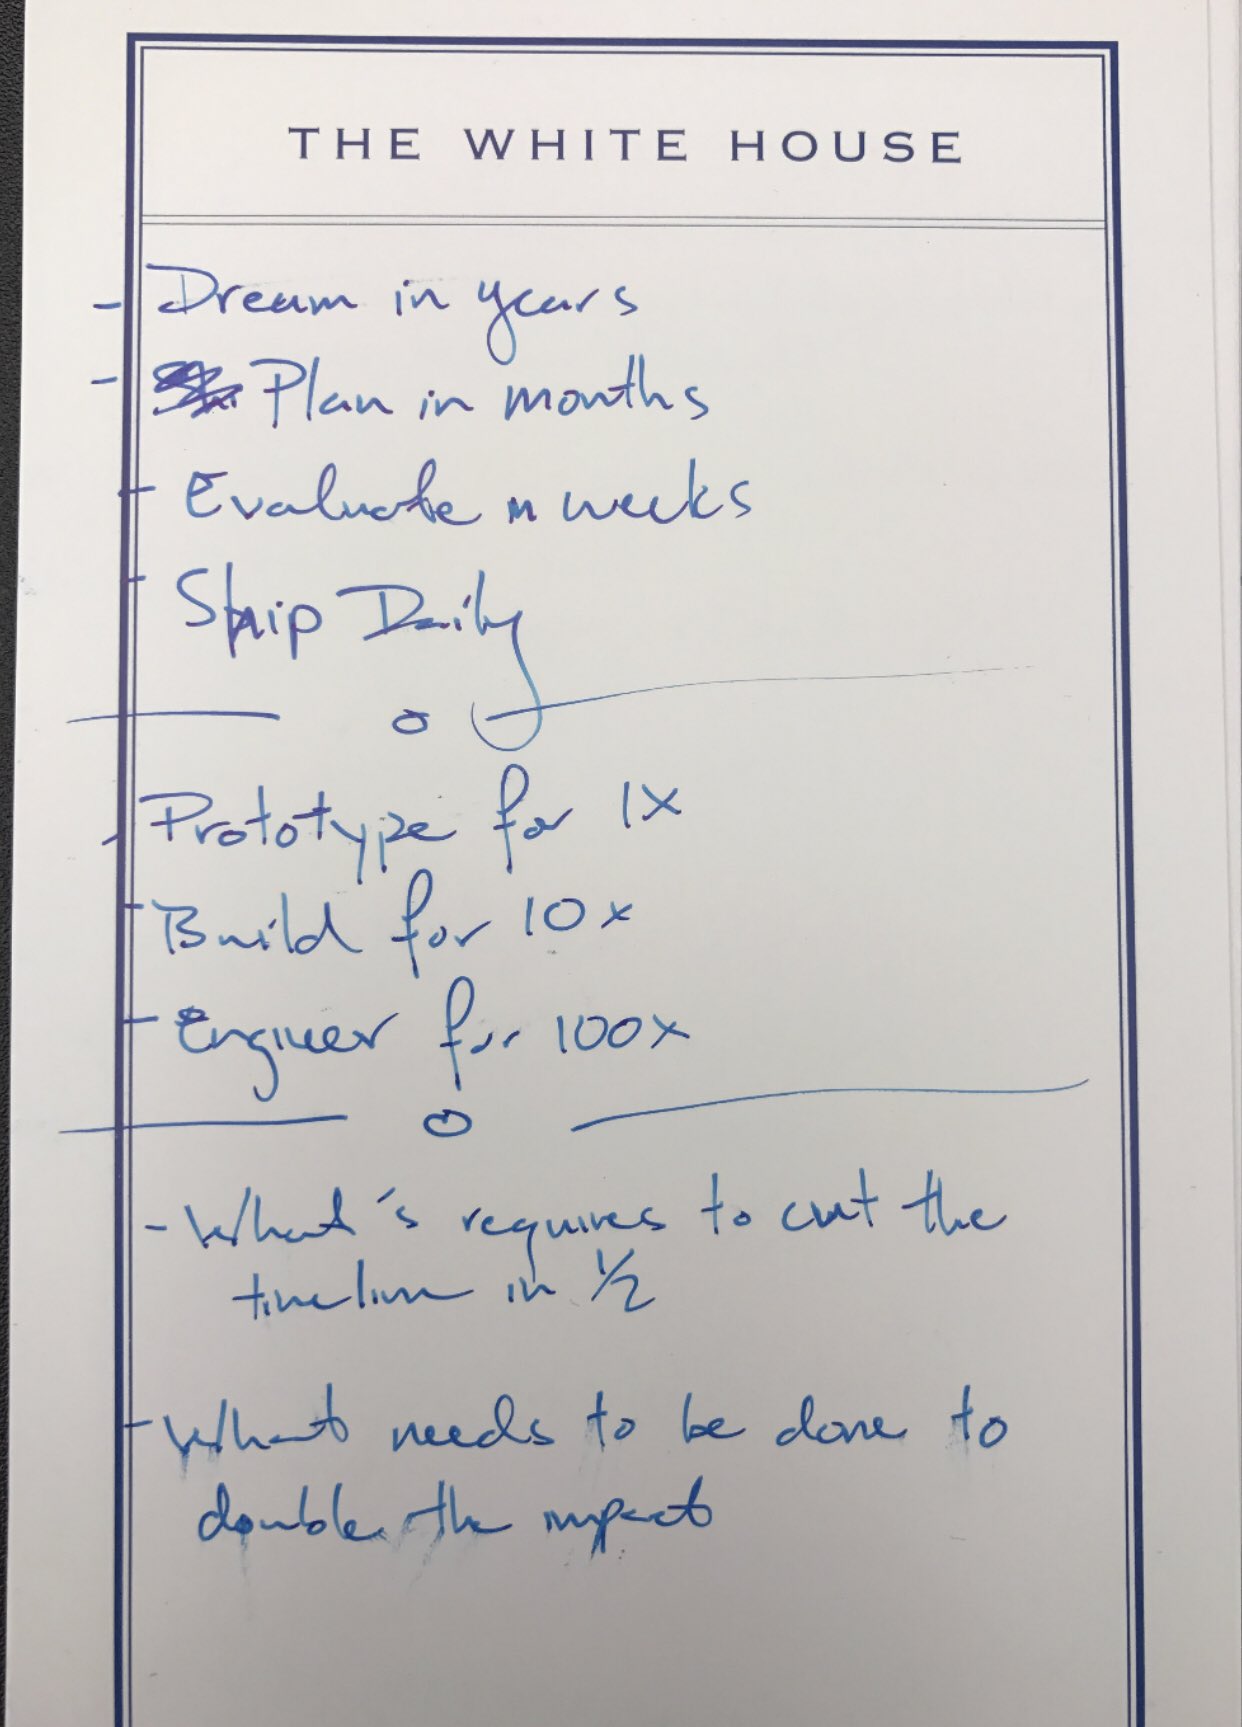 A piece of notepaper with the White House letter heading on it that has a hand-scribbled note that reads: Dream in years, plan in months, evaluate in weeks, ship daily. Prototype for 1x, Build for 10x, Engineer for 100x. What's required to cut the timeline in half? and What needs to be done to double the impact?